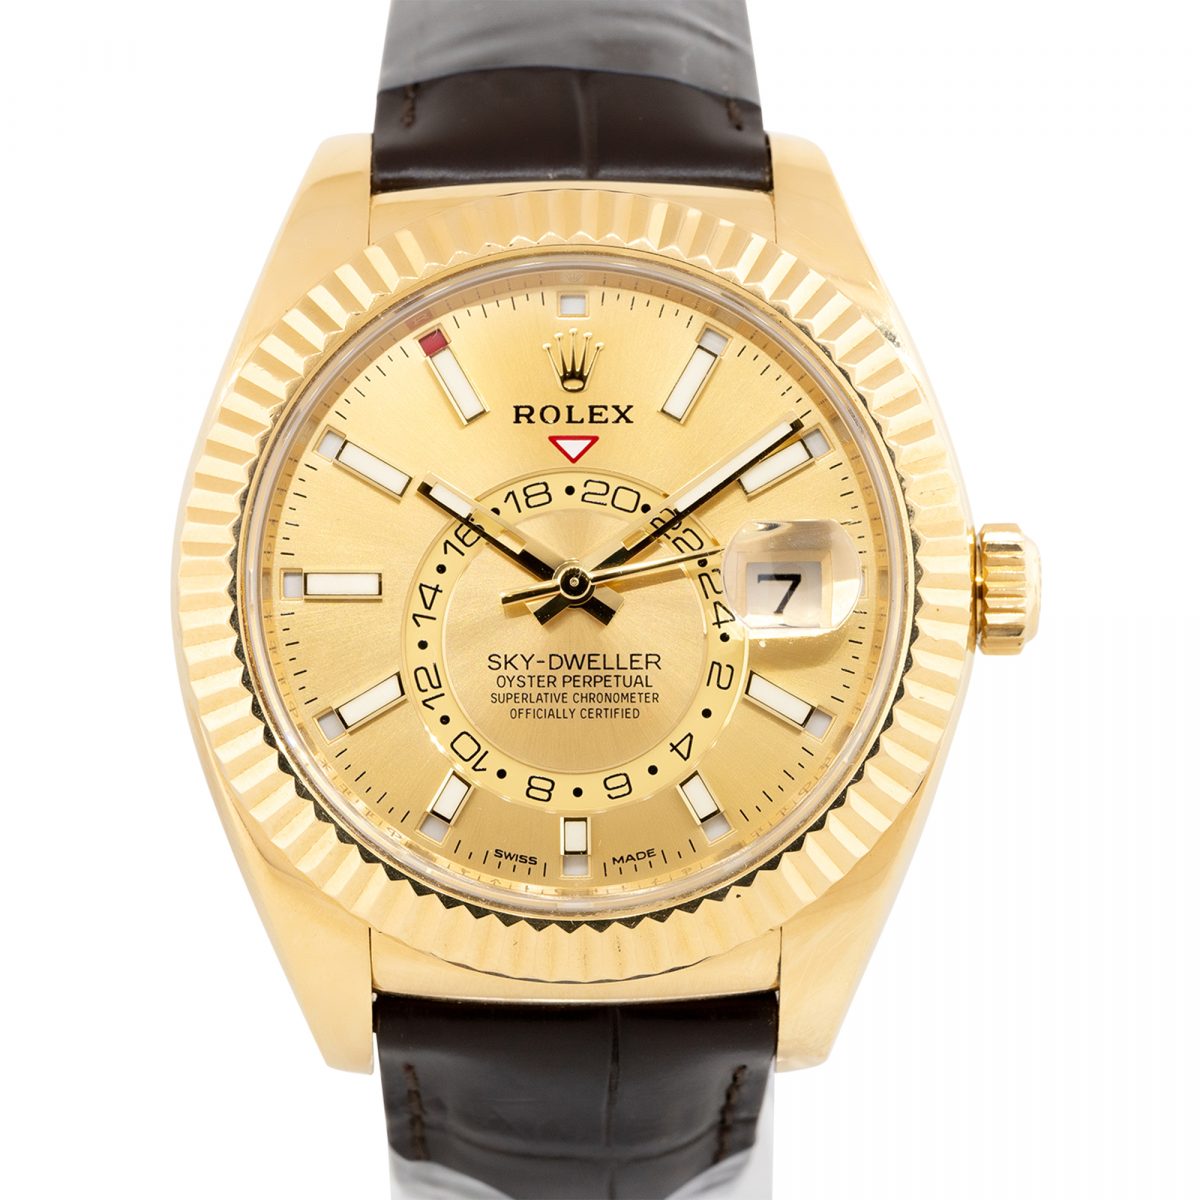 Rolex 326138 Sky-Dweller 18K Yellow Gold Watch on Brown Leather